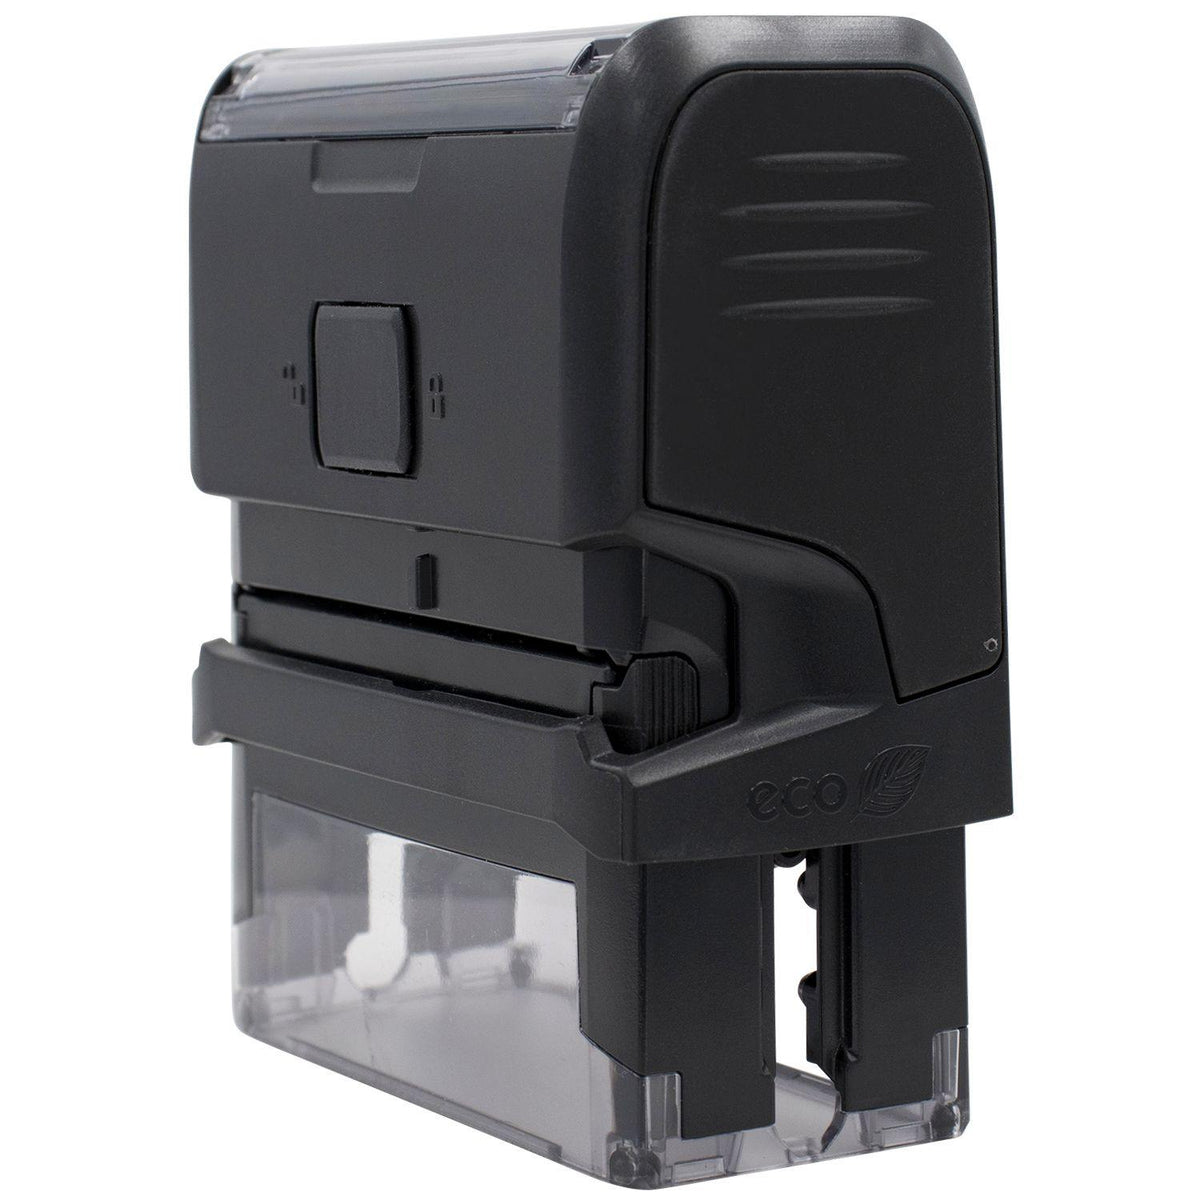 Side View of Large Self-Inking Bold Copy Stamp at an Angle